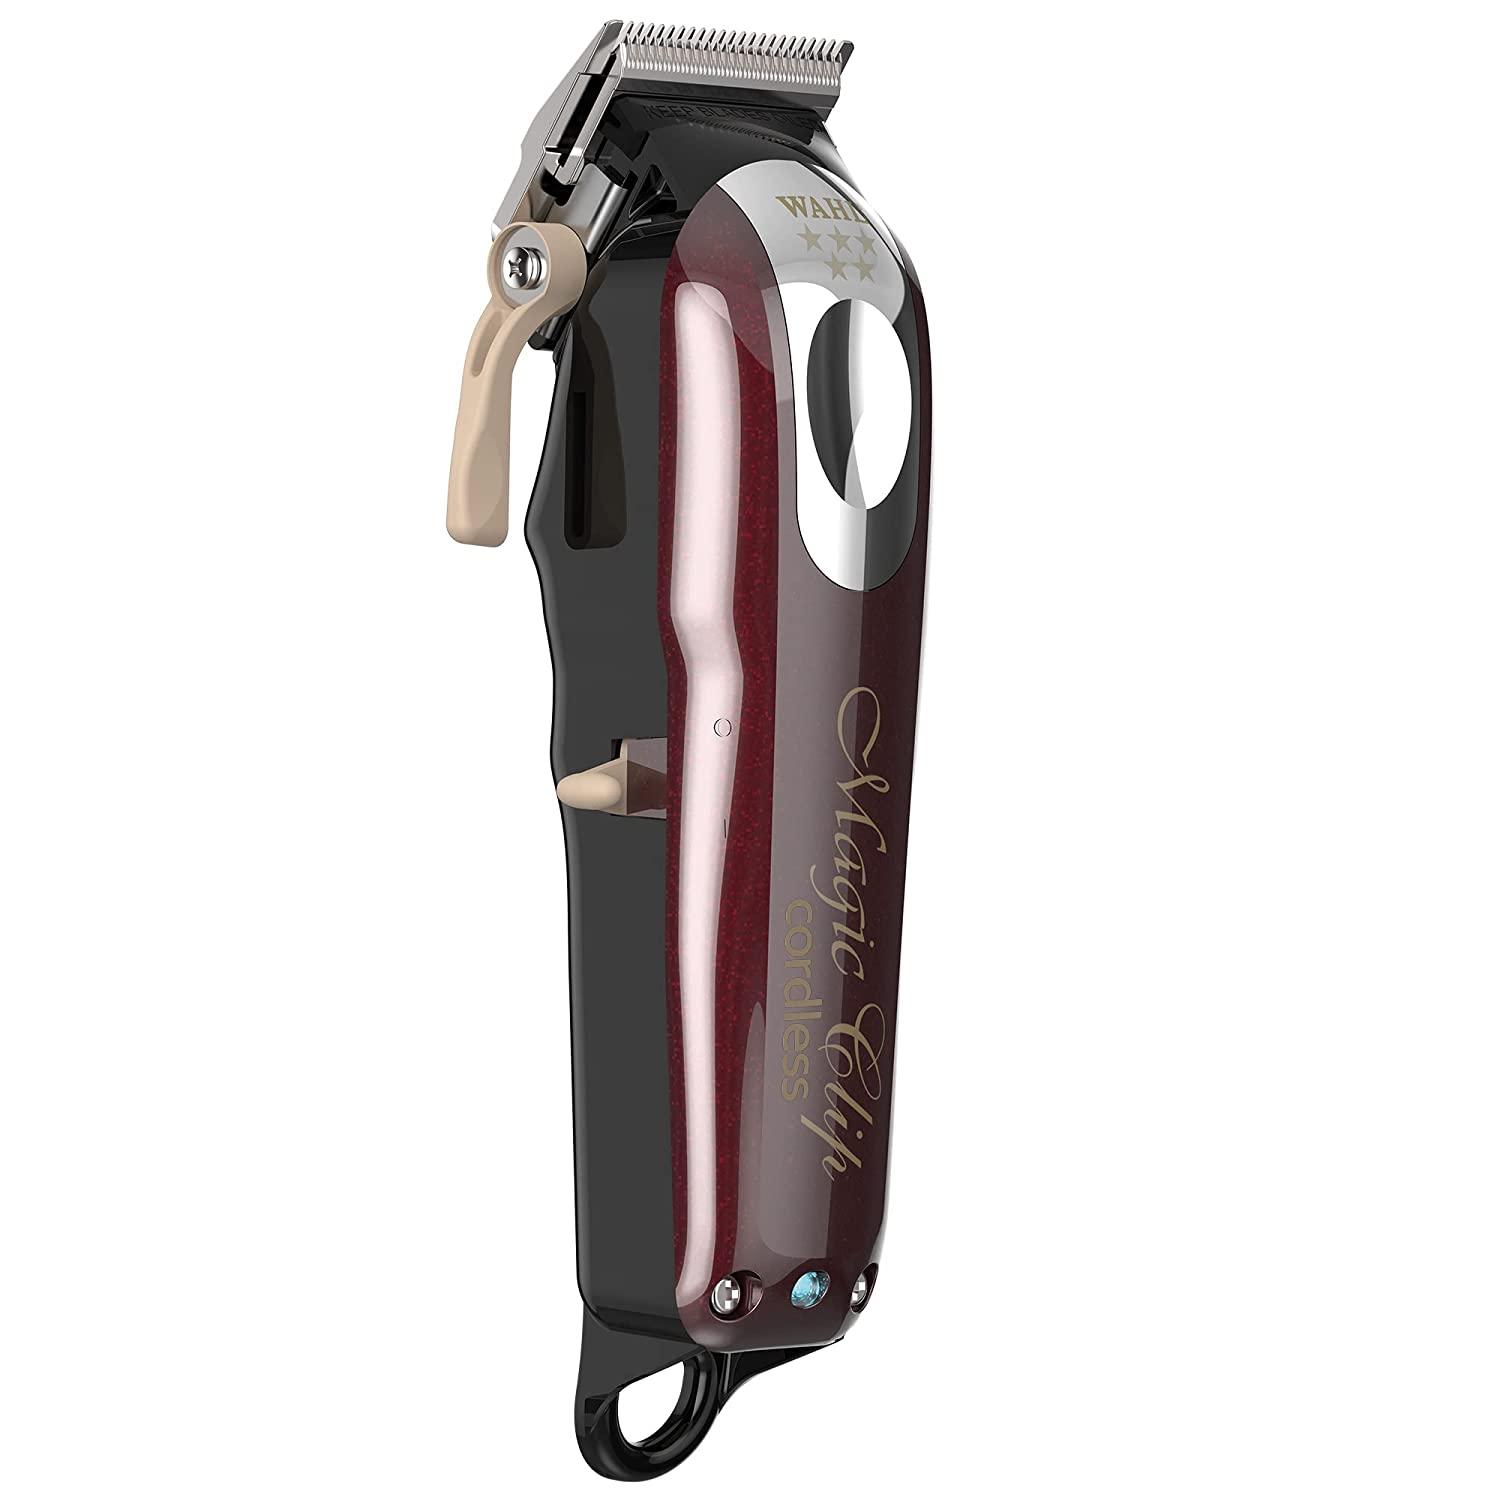  Wahl 5 Star Cordless Magic Clip, Professional Hair Clippers,  Pro Haircutting Kit, Clippers for Blunt Cuts, Adjustable Taper Lever,  Crunch Blade, Cordless, Lightweight, Barbers Supplies : Beauty & Personal  Care